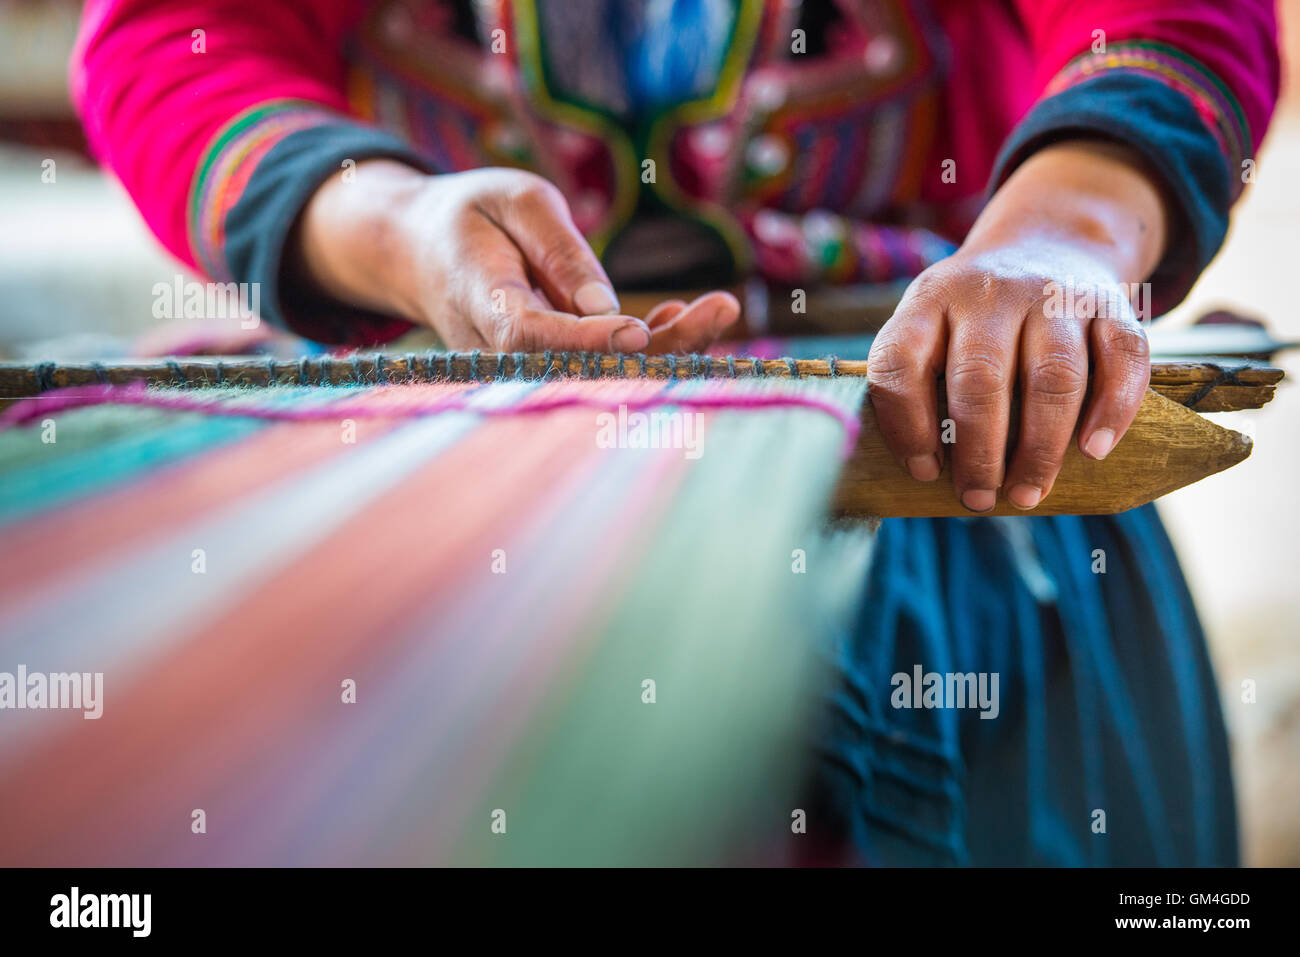 Peruvian weaver's hands crafting colorful wool traditional weaving Stock Photo